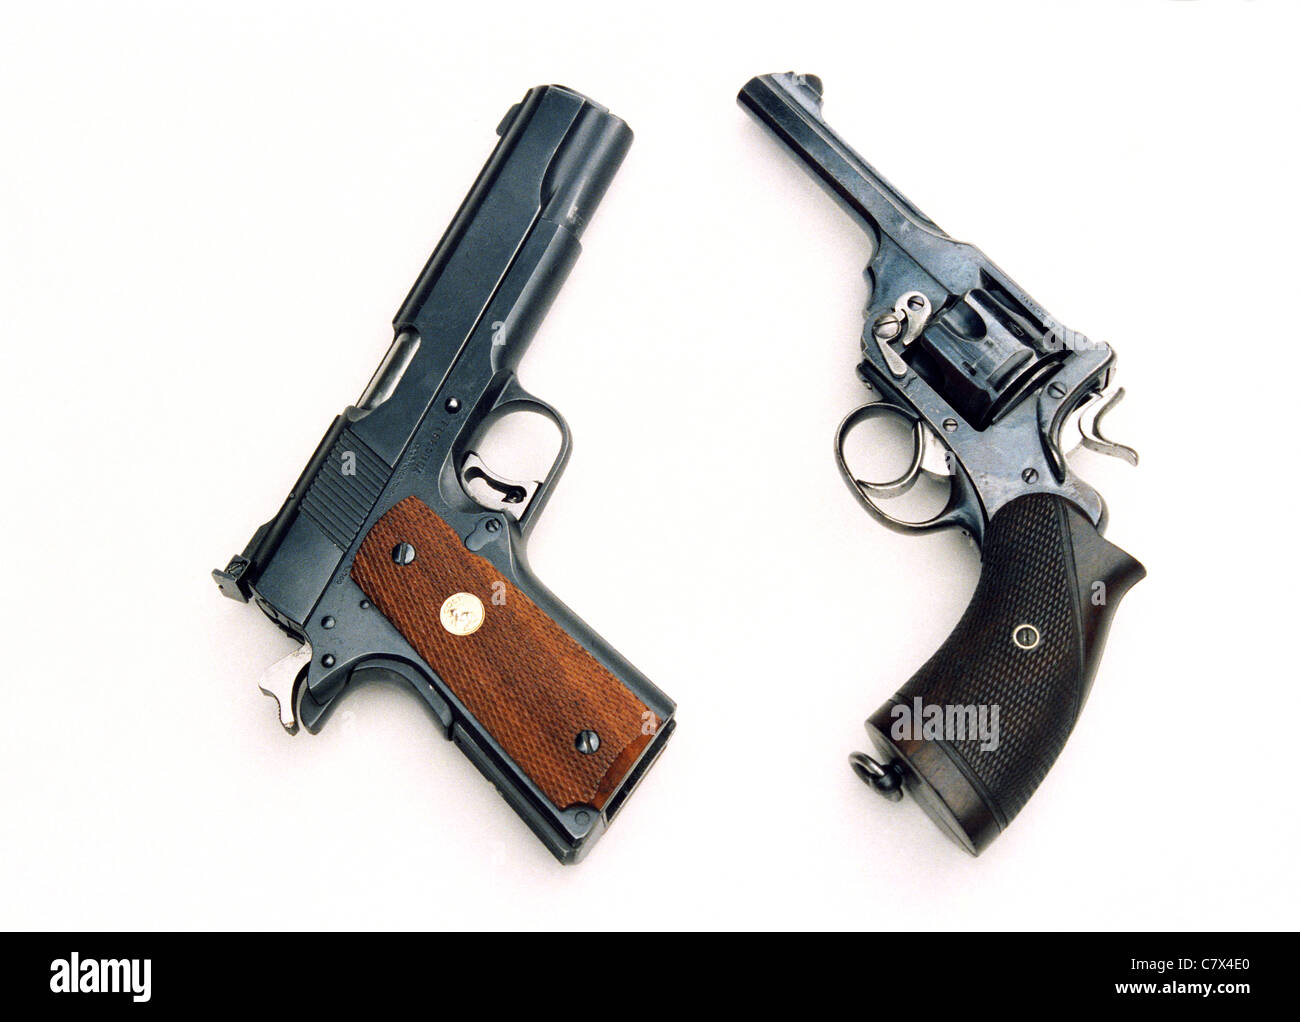 Colt  M1911A, 70 Series Gold Cup National Match .45 ACP and a Webley 380 200 revolver Stock Photo